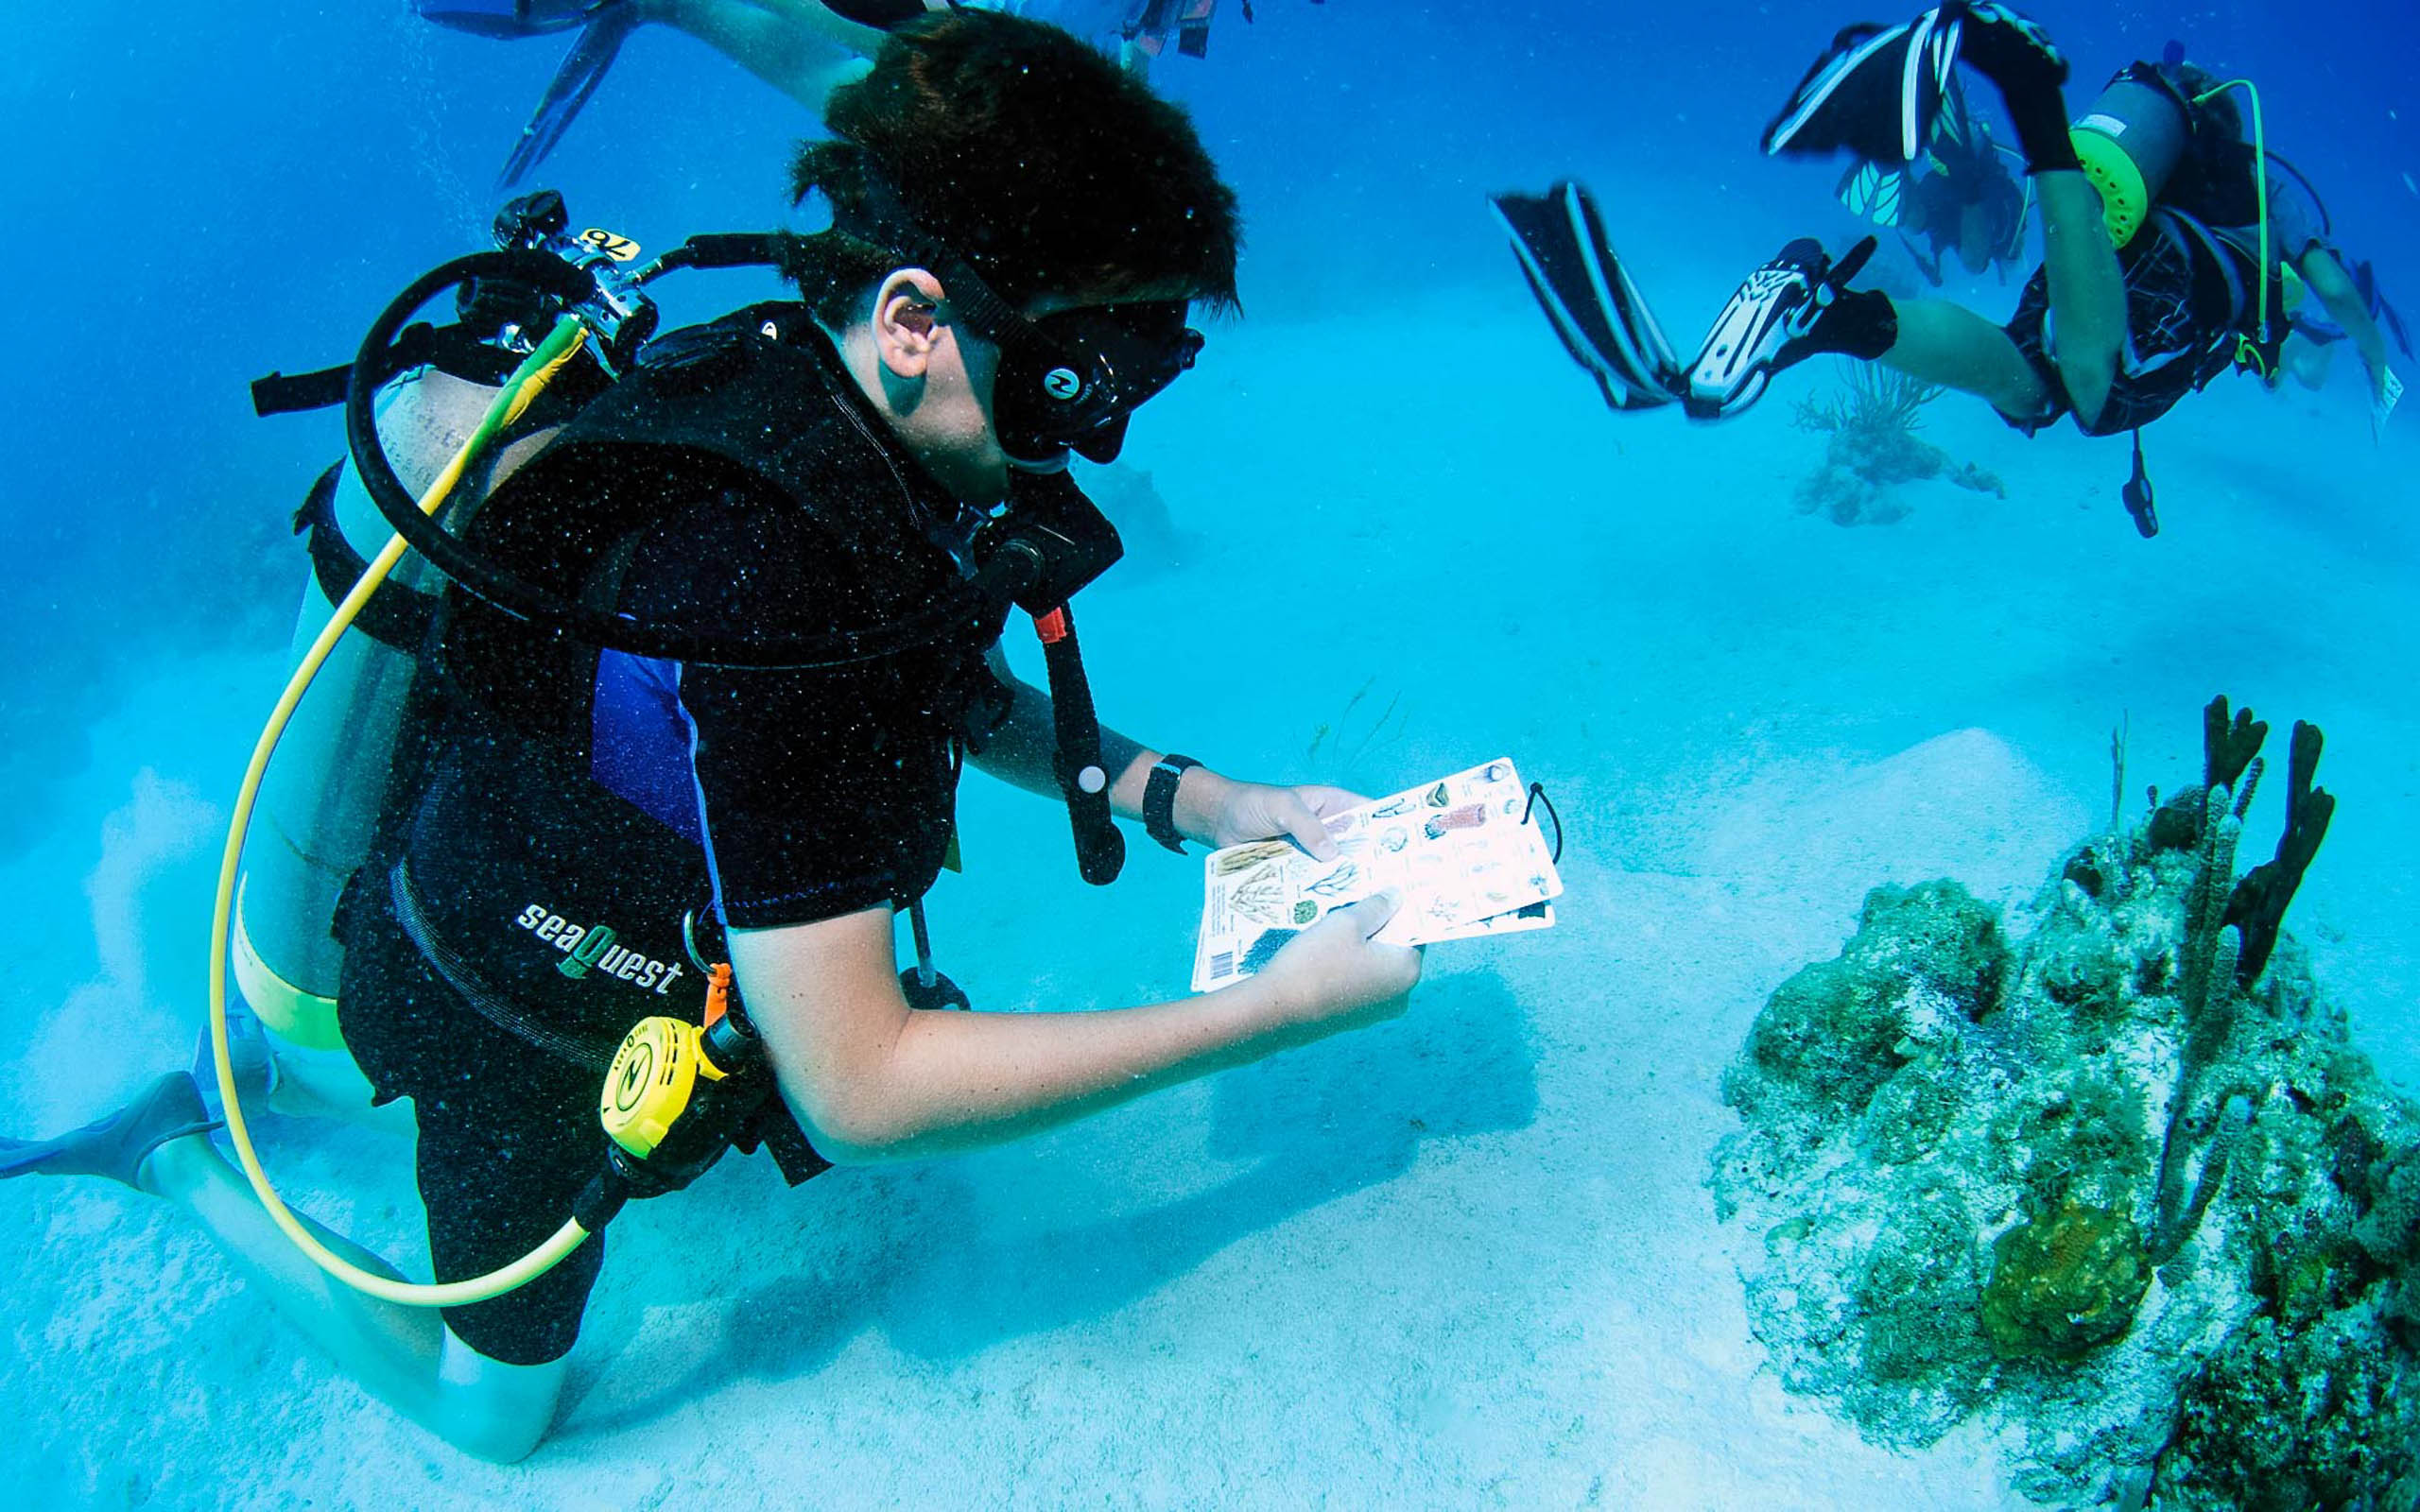 A group of scuba divers reading a book underwater.